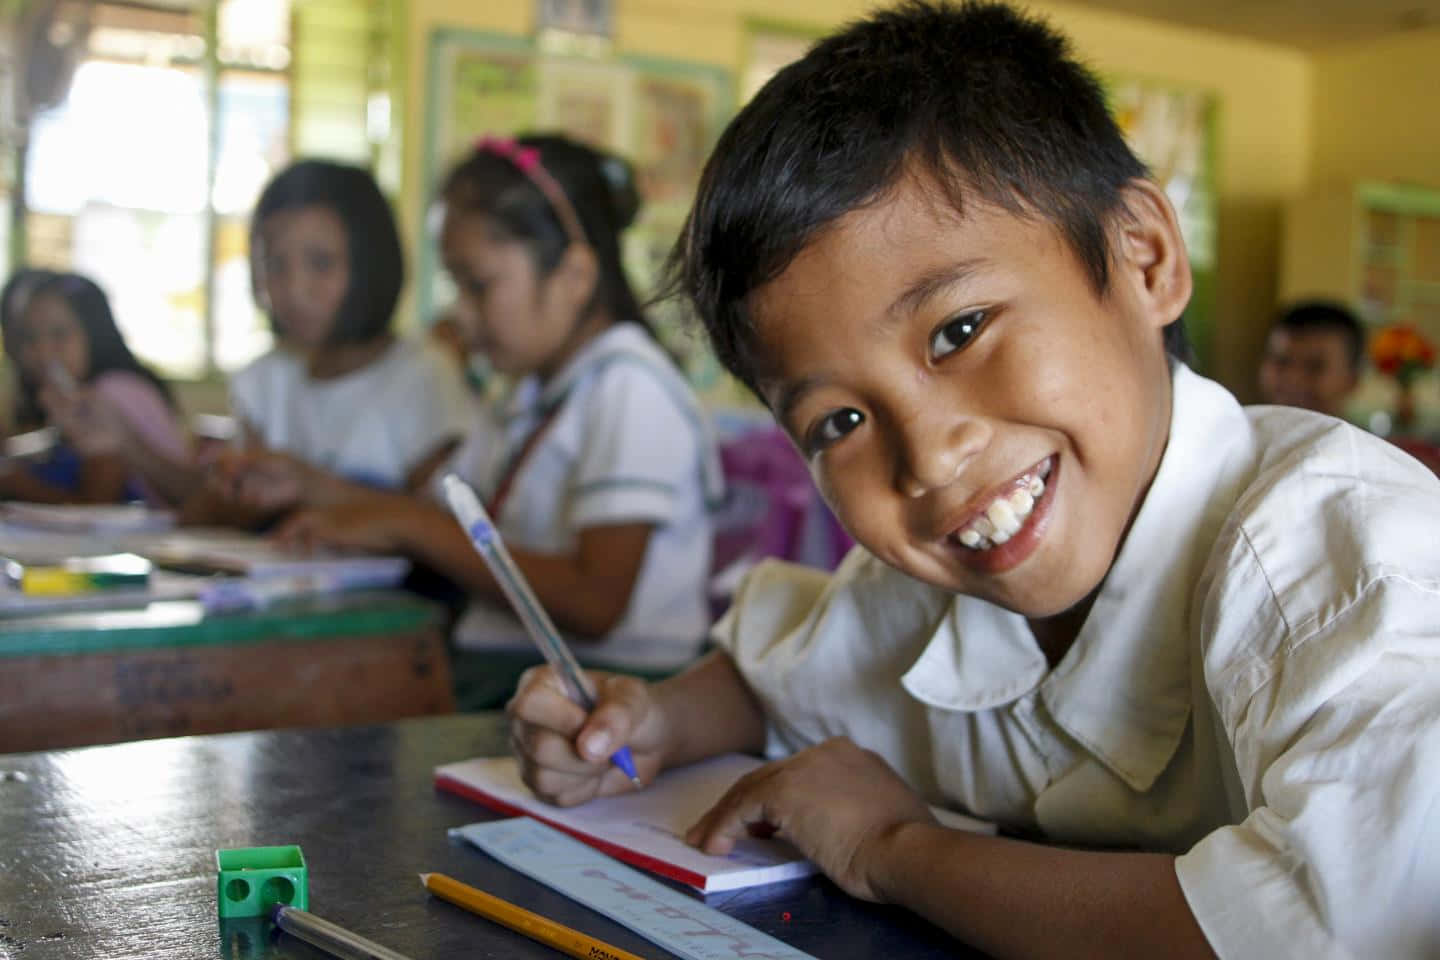 A Boy Smiles While Writing In A Notebook